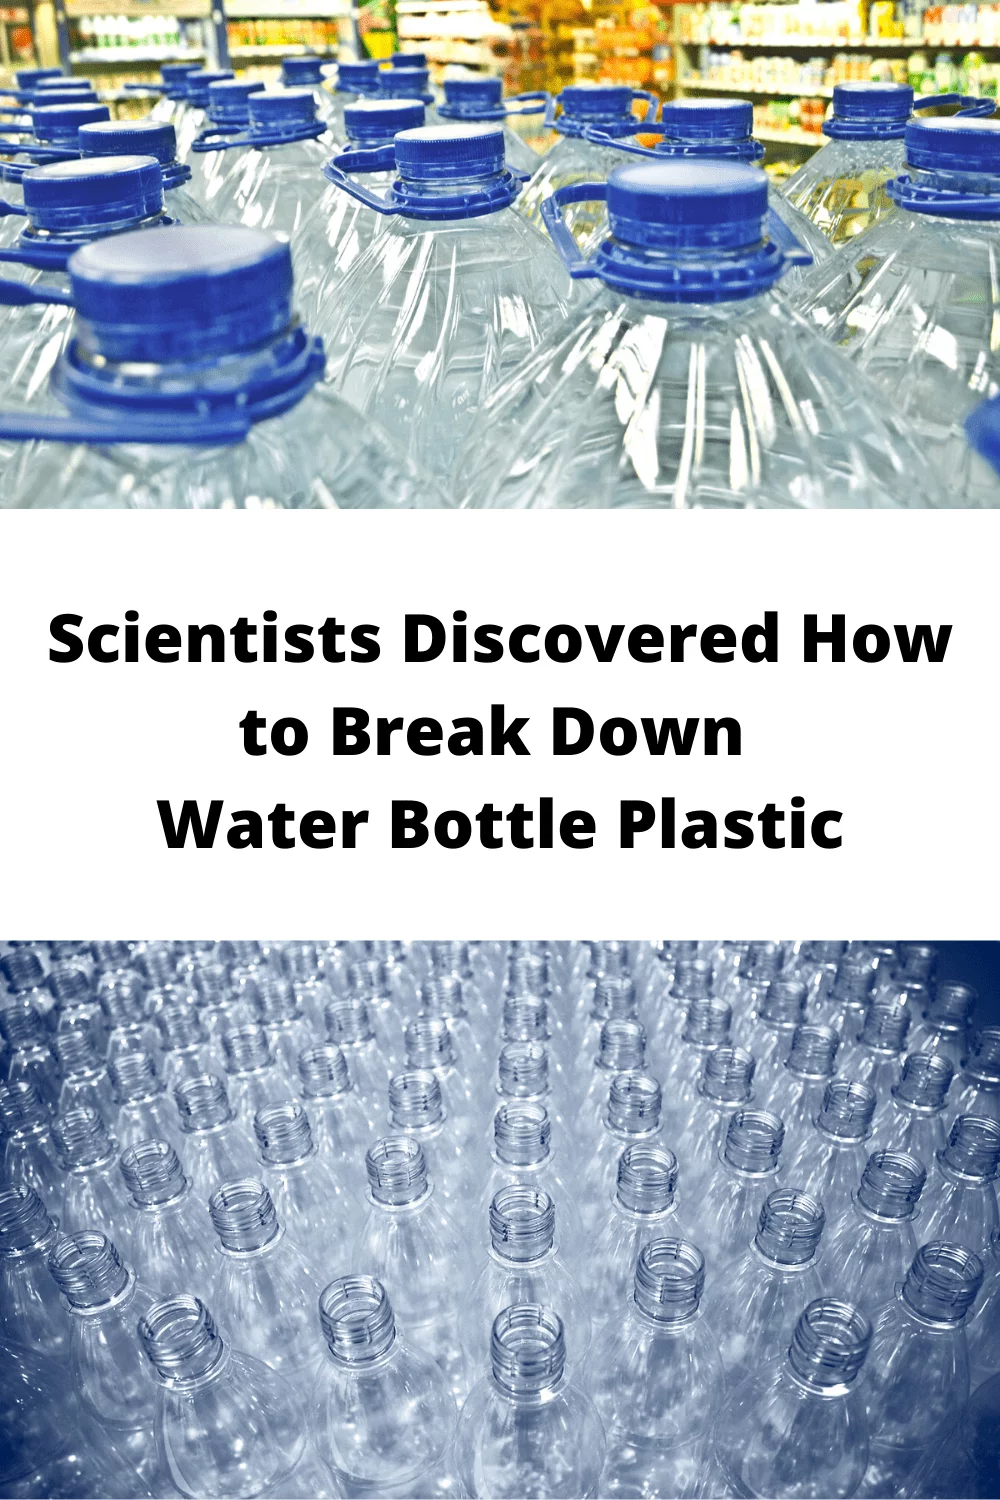 Scientists Discovered How to Break Down Water Bottle Plastic